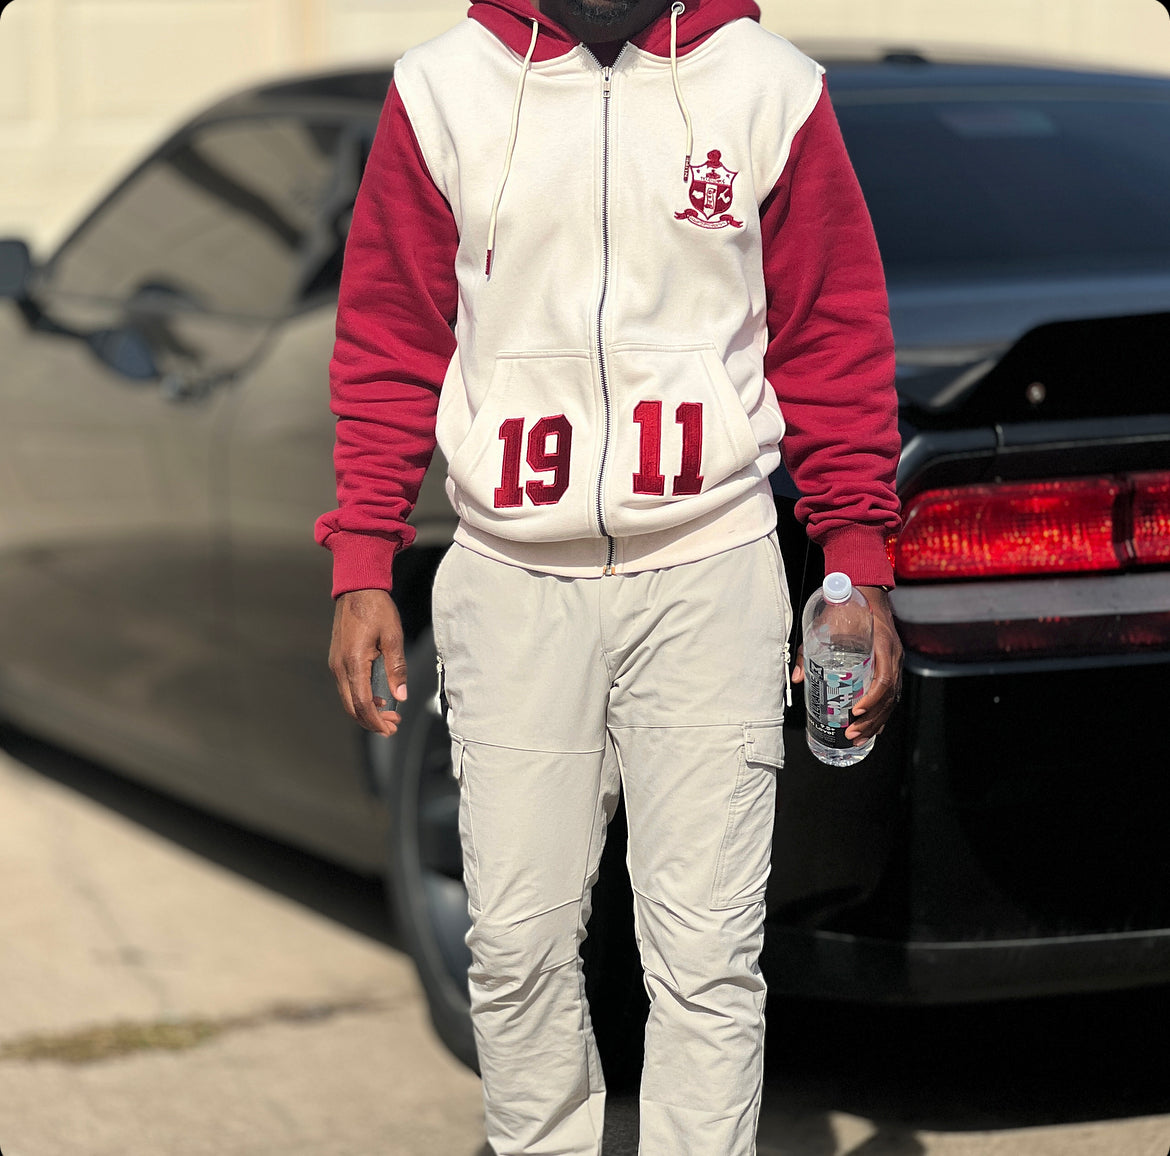 This Kappa alpha psi hoodie is a must-have for any member of the fraternity. The floating 1911 and shield design adds a stylish touch to this hoodie, which is perfect for Nupes who want to show off their love for Kappa alpha psi. The hoodie is made from high-quality materials and features a zipper accent for added convenience.